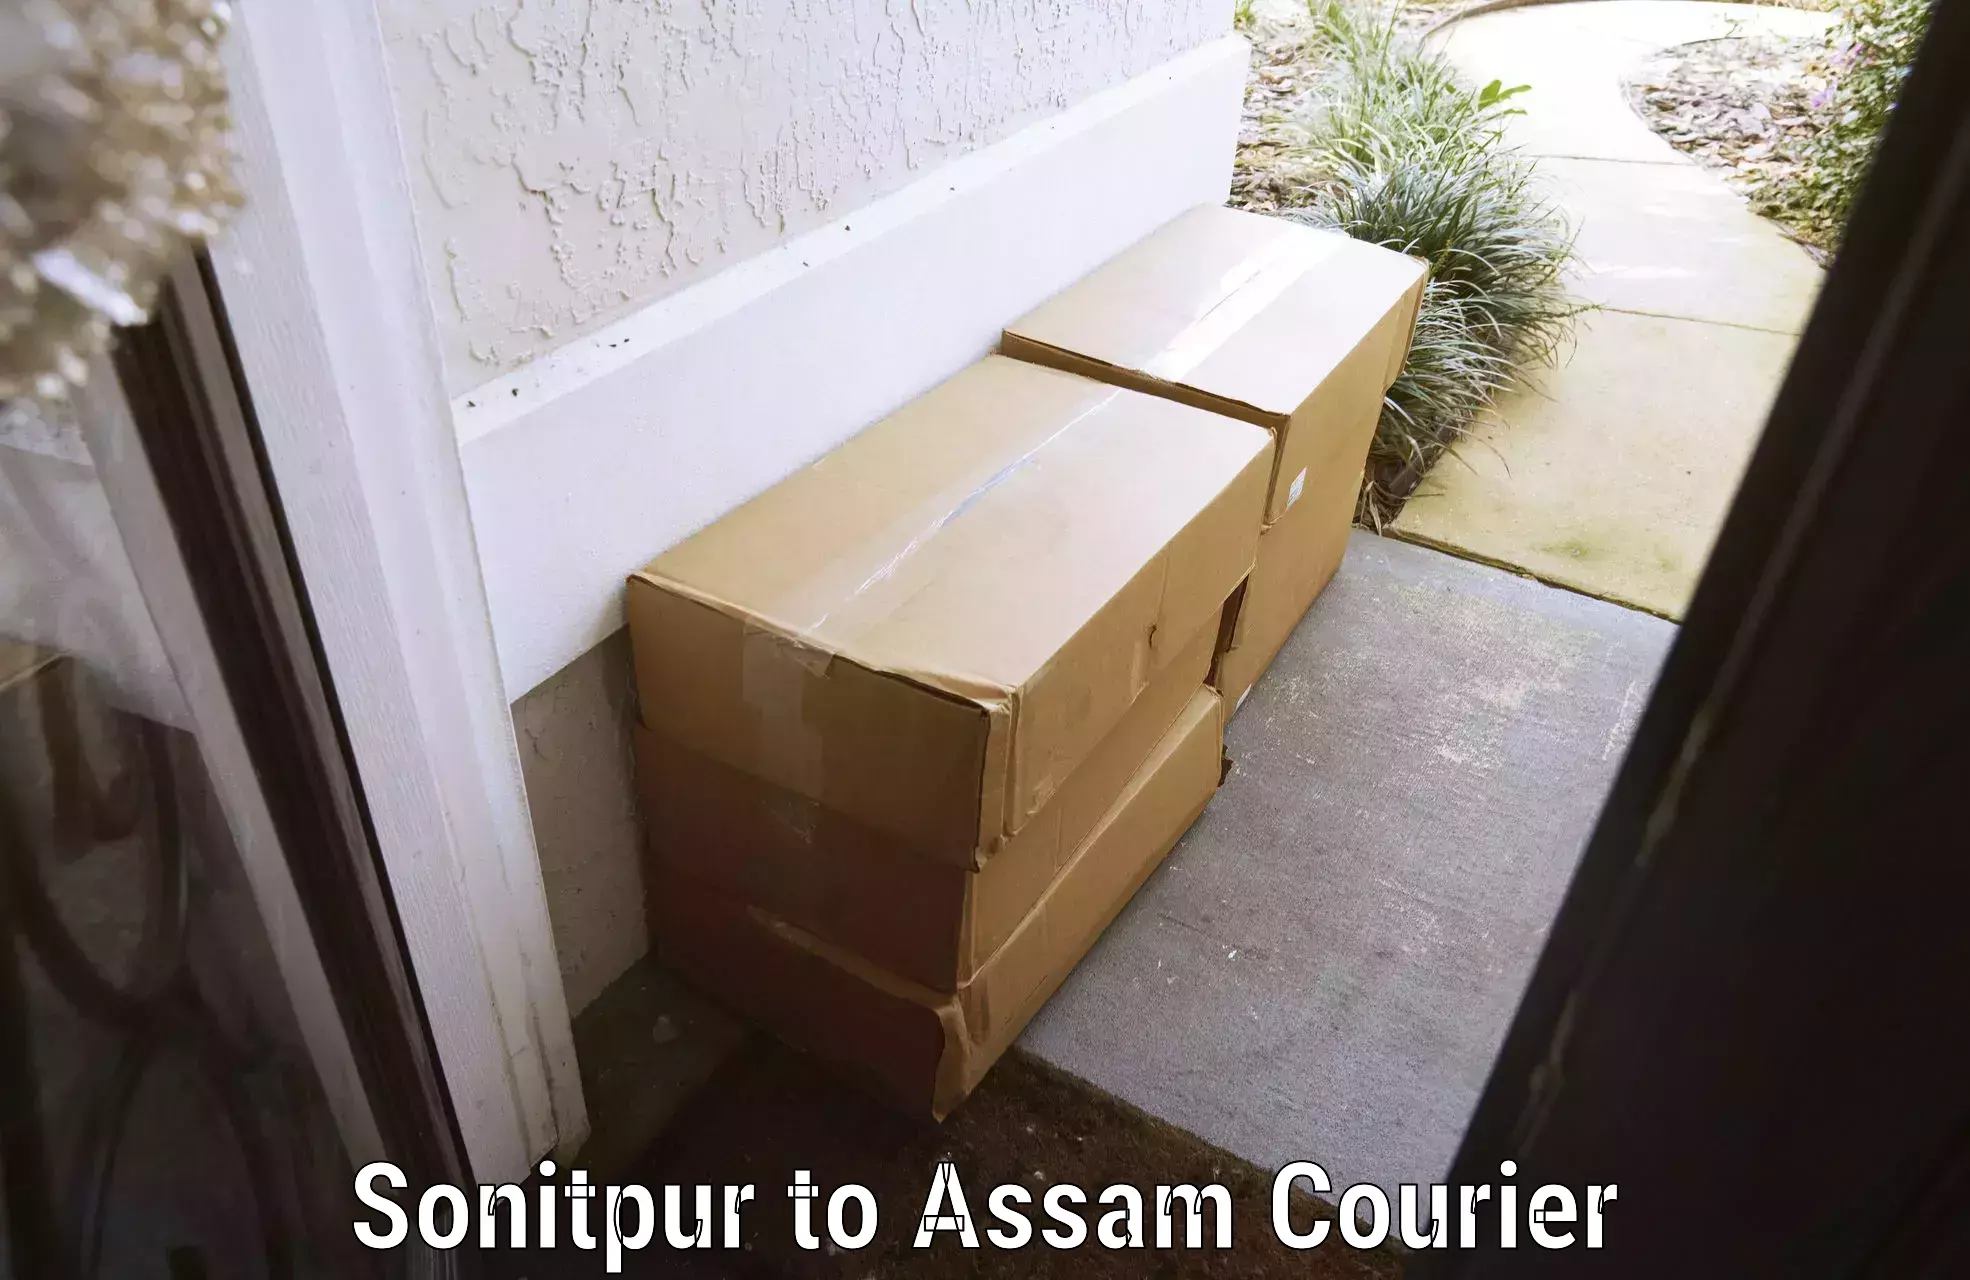 Luggage shipment specialists Sonitpur to Assam